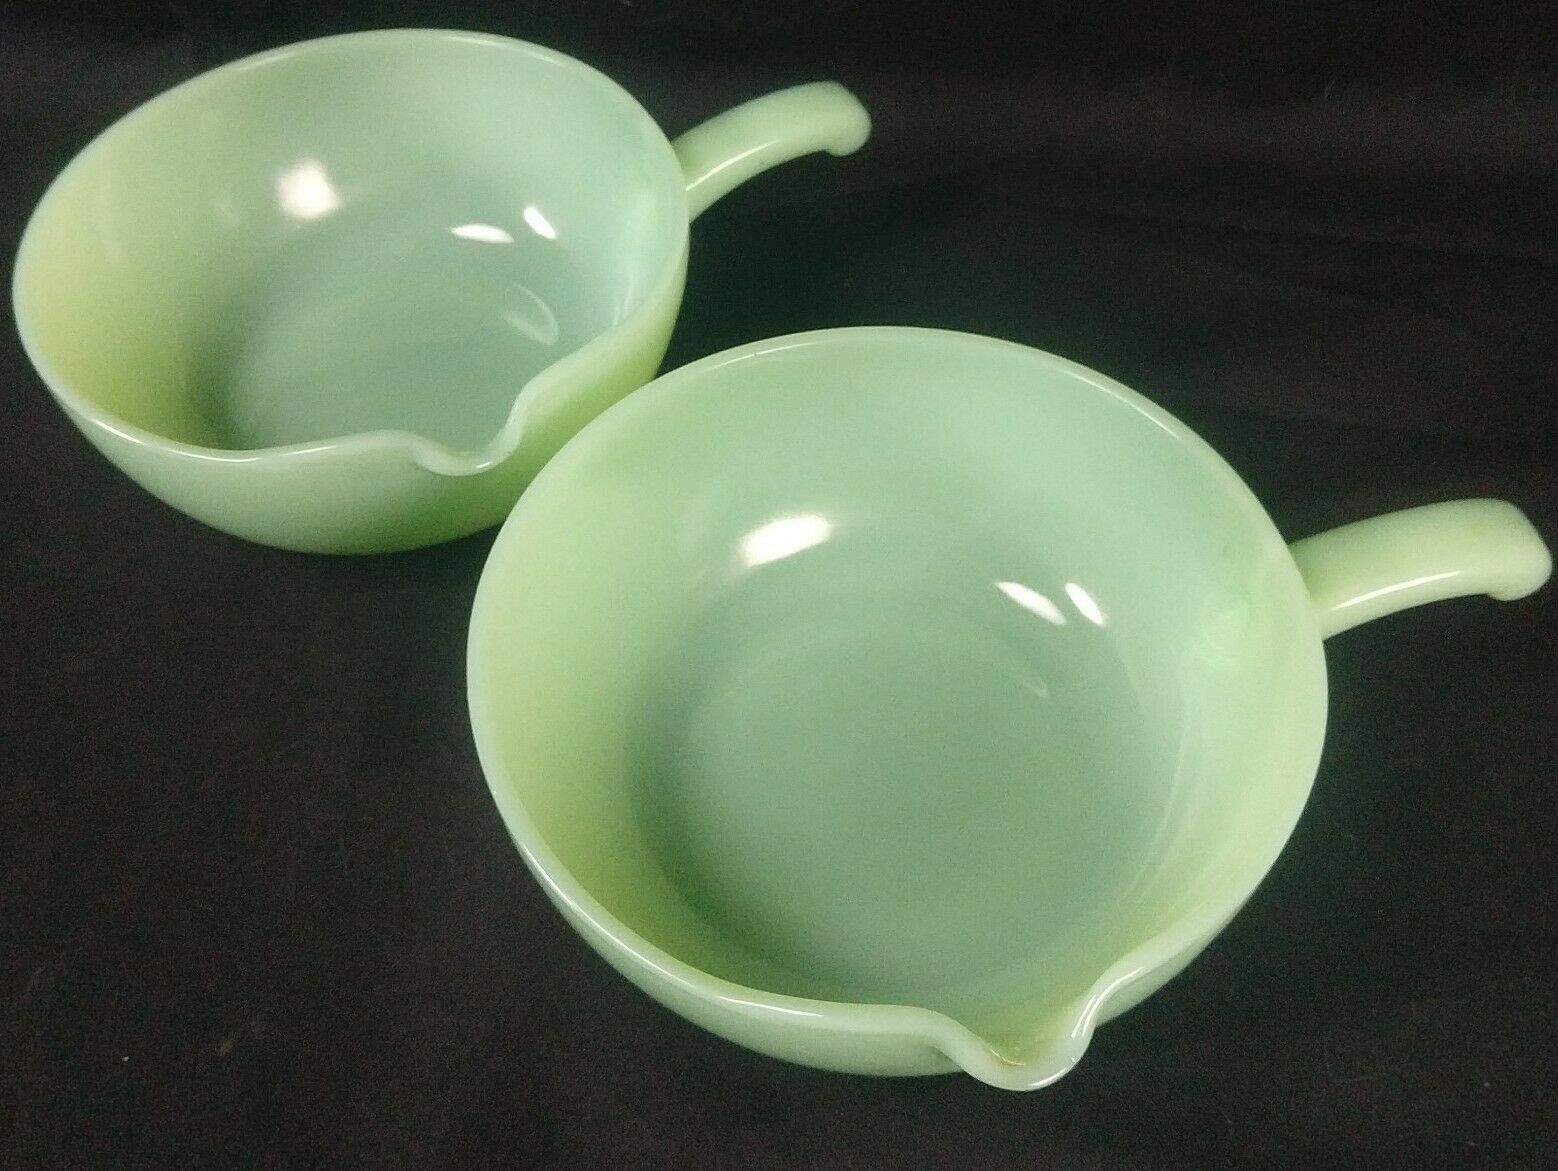 Pair Of Jadeite Green Fire King Spout Skillet Handle Bowls 1945-50's Vintage